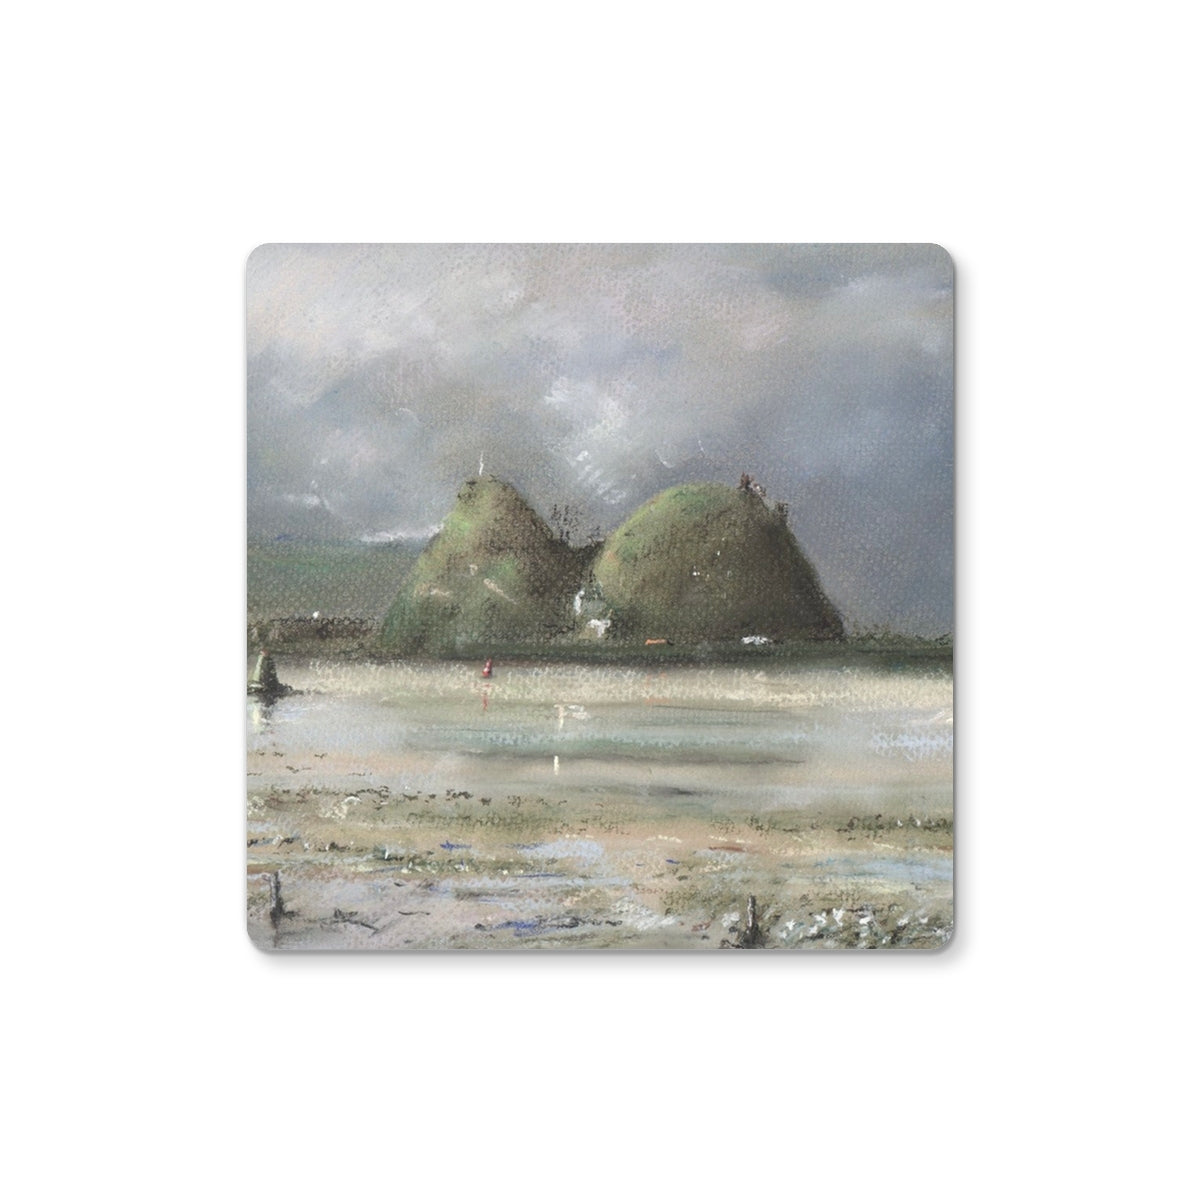 Dumbarton Rock Art Gifts Coaster-Coasters-River Clyde Art Gallery-2 Coasters-Paintings, Prints, Homeware, Art Gifts From Scotland By Scottish Artist Kevin Hunter